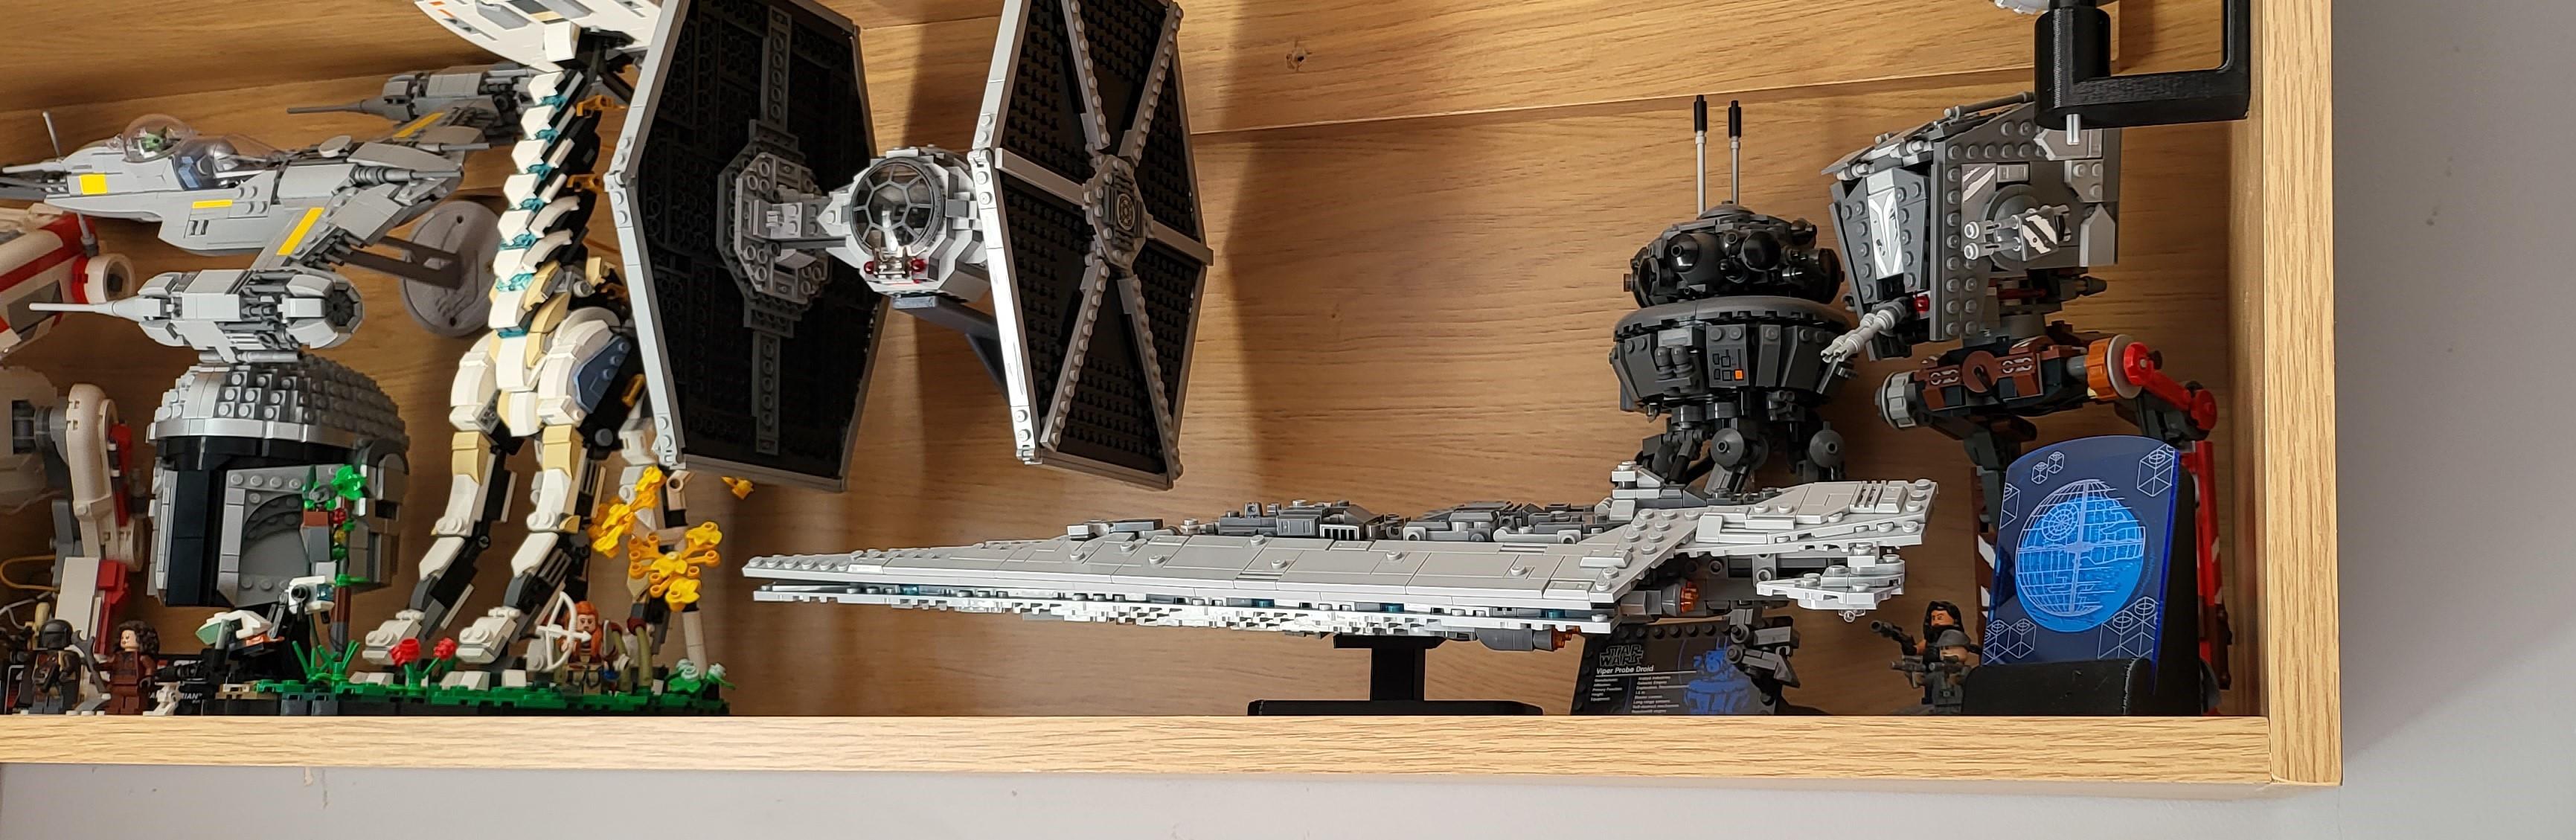  Lego 75356 Executor Super Star Destroyer Low Stand  3d model